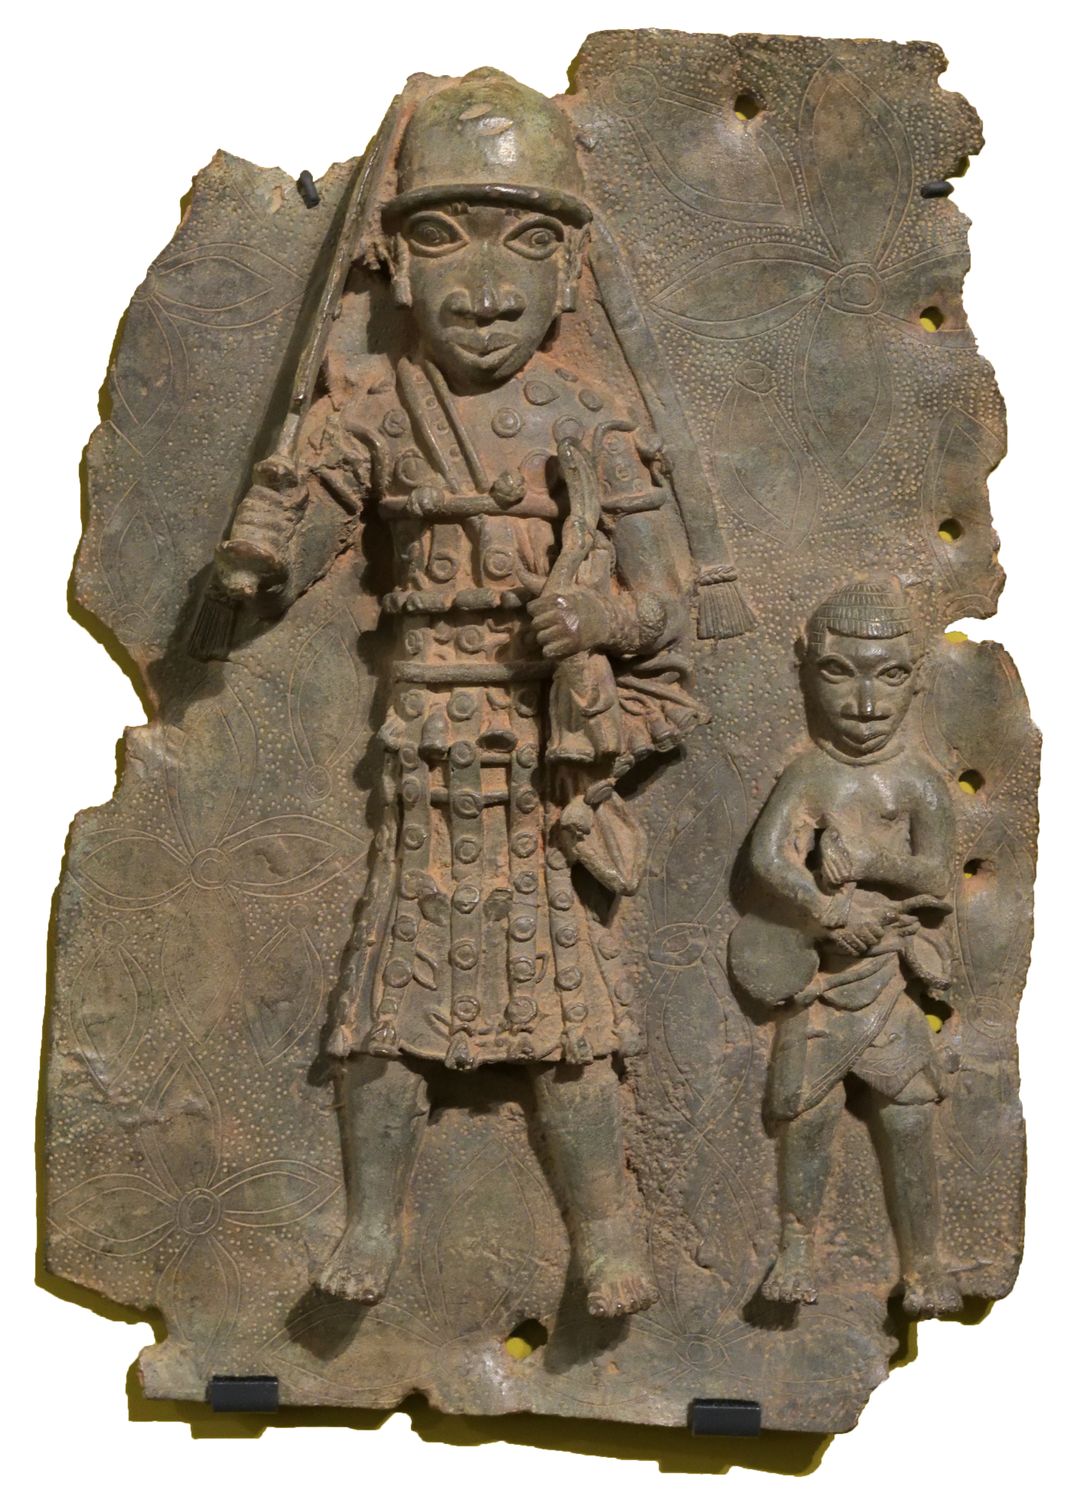 A Benin Bronze plaque of an Edo dignitary in ceremonial dress and an attendant